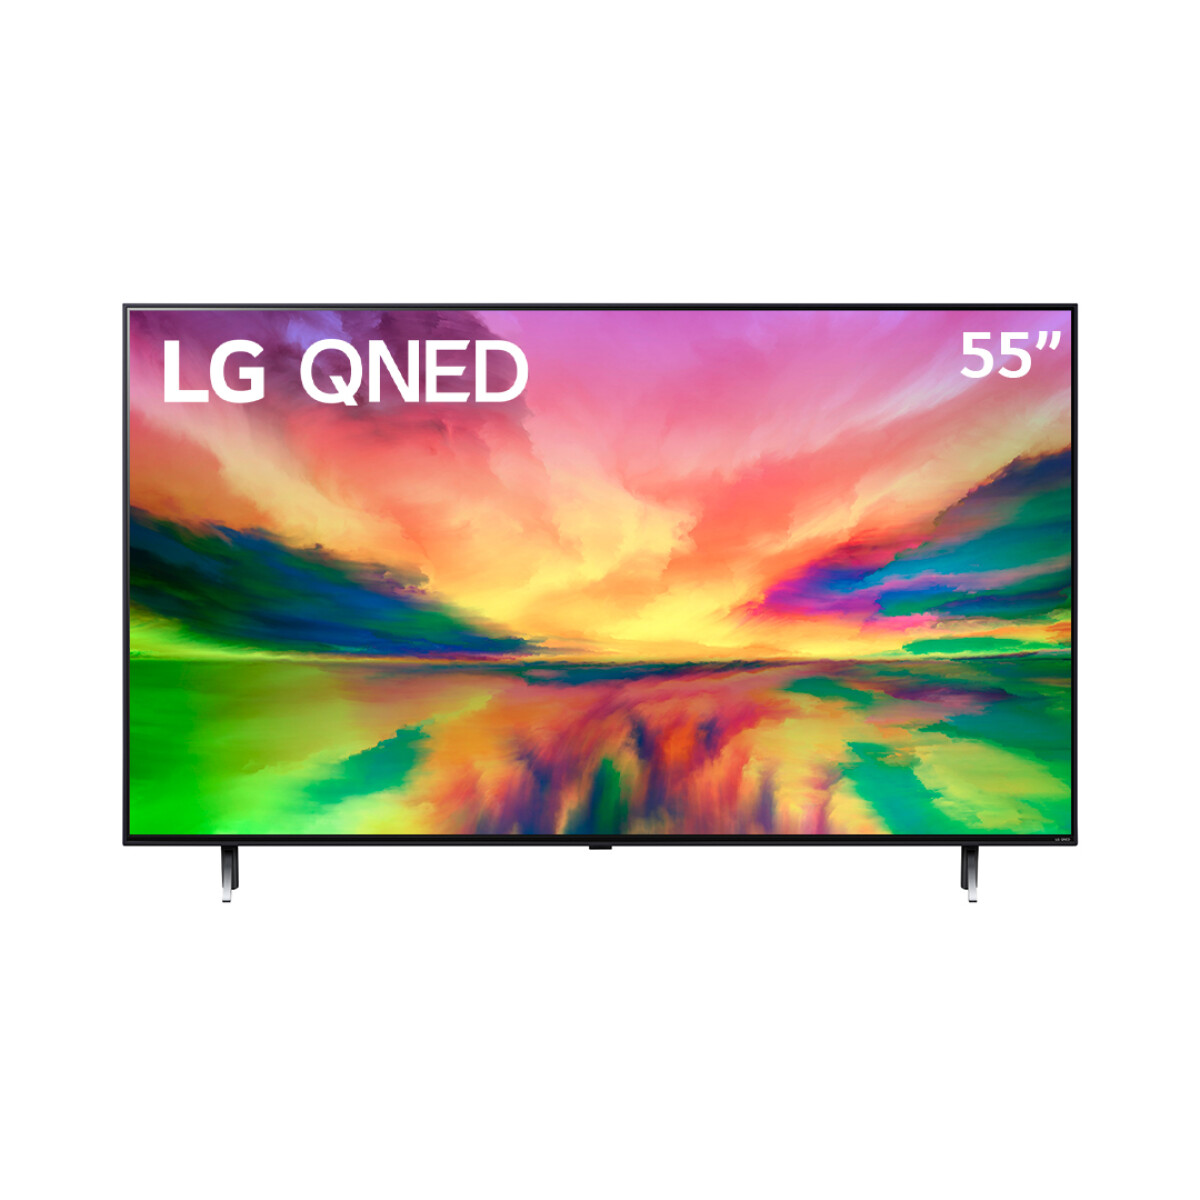 LG QNED 4K 55" 55QNED80 